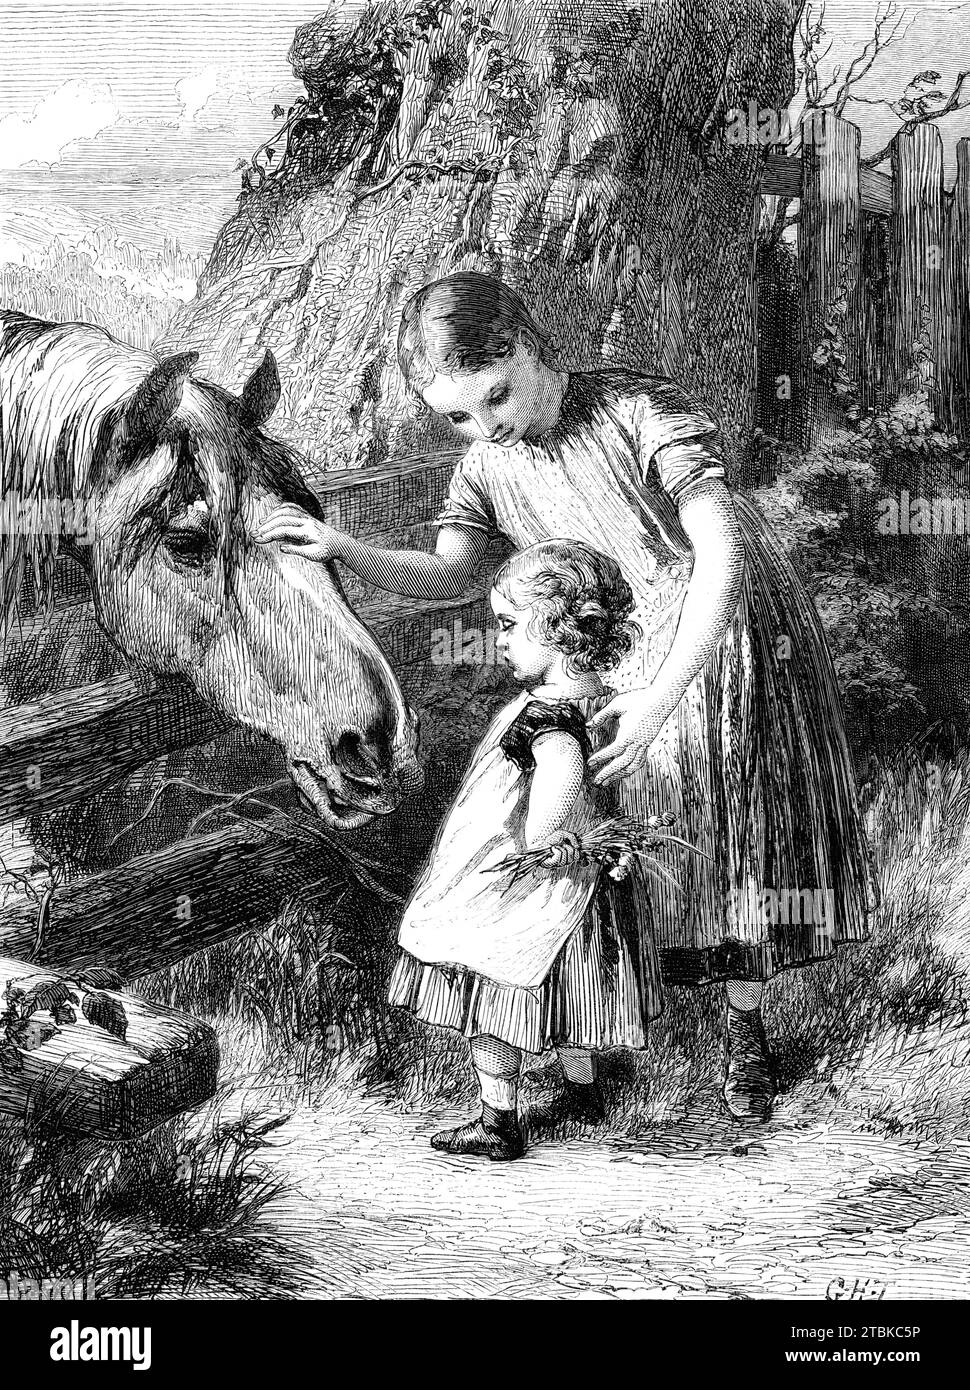 &quot;Want of Confidence&quot;, by G. H. Thomas, from the exhibition of the Royal Academy, 1861. Engraving from a painting. 'Mr. Thomas idealises a very pretty notion of the mixed curiosity and bashfulness of child life in this little picture. A little boy has been induced by his elder sister to gather some wild flowers and choice herbs to feed the old horse in the neighbouring field, but when he comes to the act of presenting them his courage almost fails him - he wants confidence to place them in the gaping mouth of the harmless animal who stretches forward to receive them. The sister, by pl Stock Photo